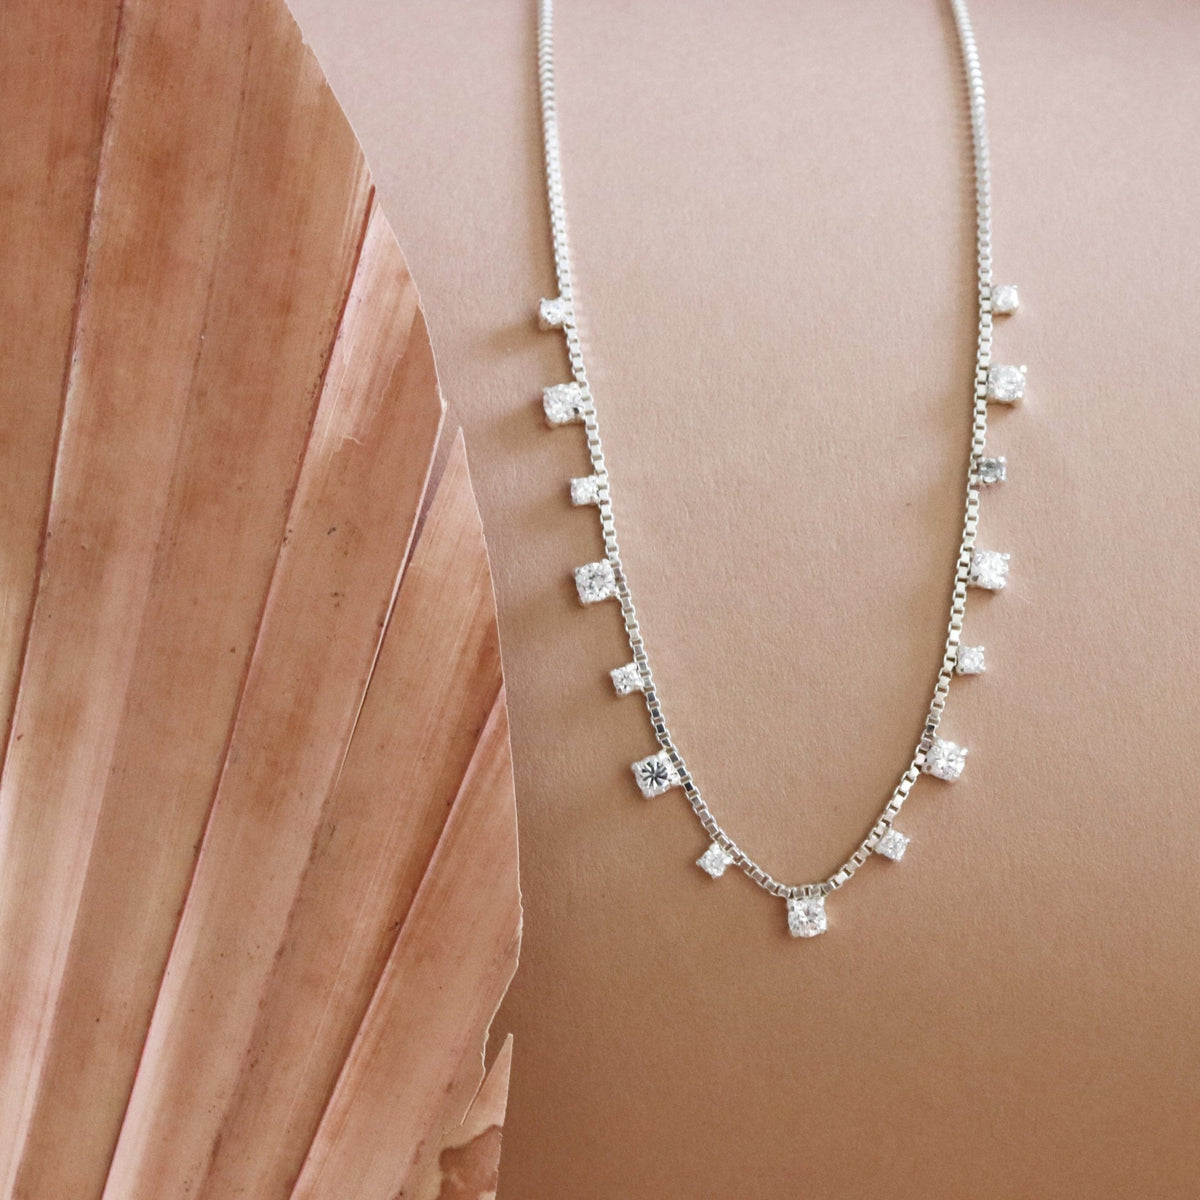 SCATTERED LOVE COLLAR NECKLACE - CUBIC ZIRCONIA &amp; SILVER - SO PRETTY CARA COTTER